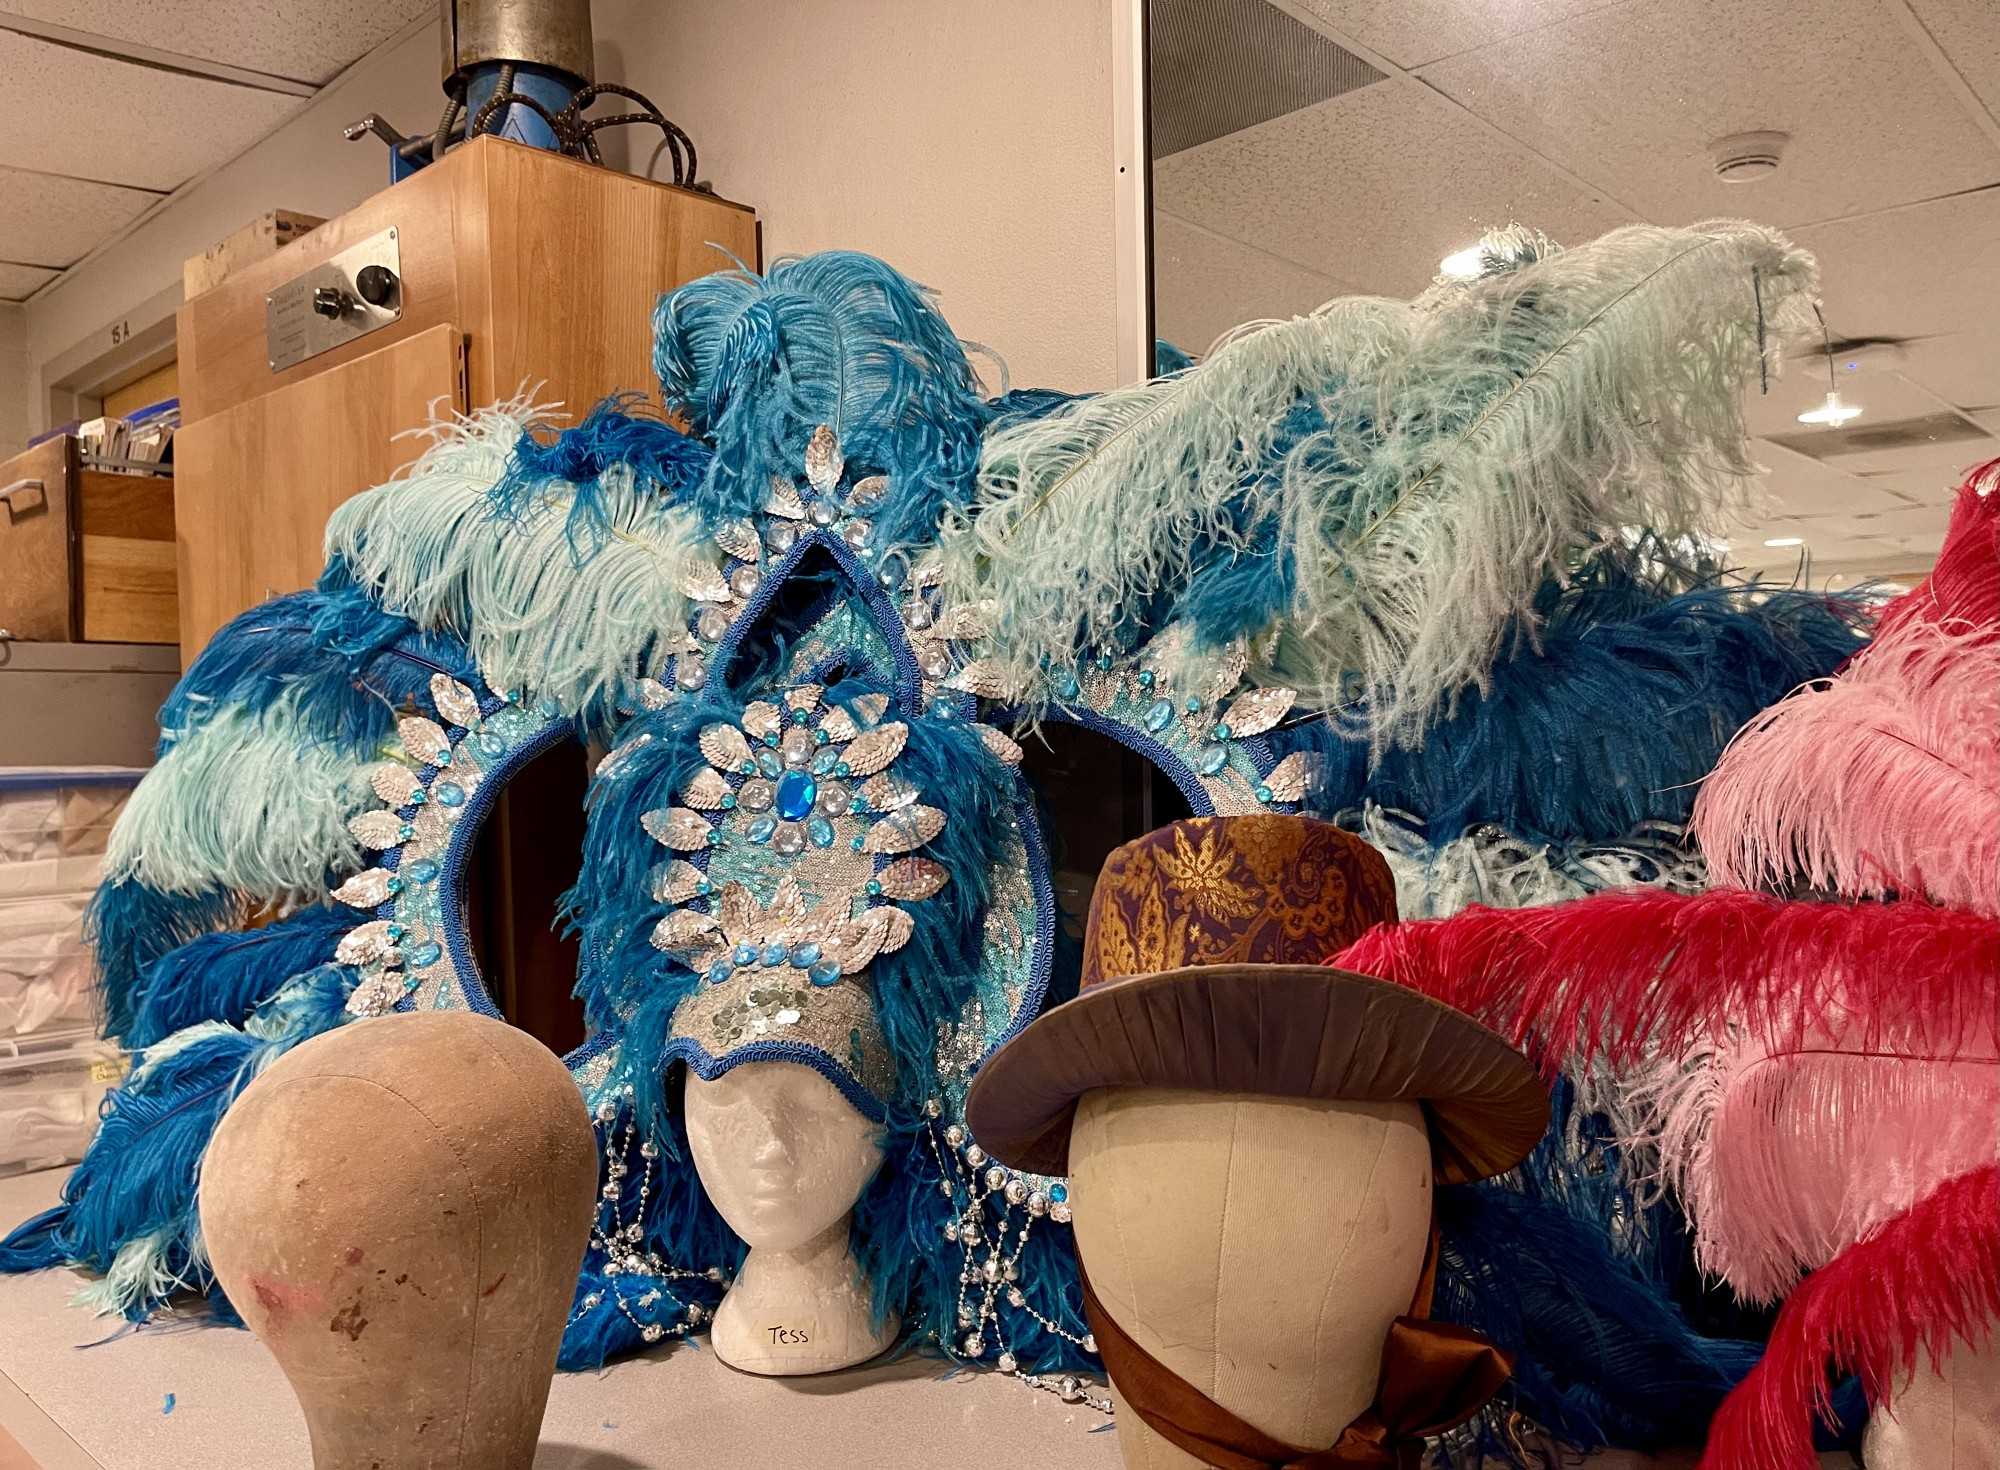 Elaborate headdresses for "Vaud" rest on a table in the University of Arizona’s costume department on Monday, Nov. 21. (Photo by Hannah Cree)